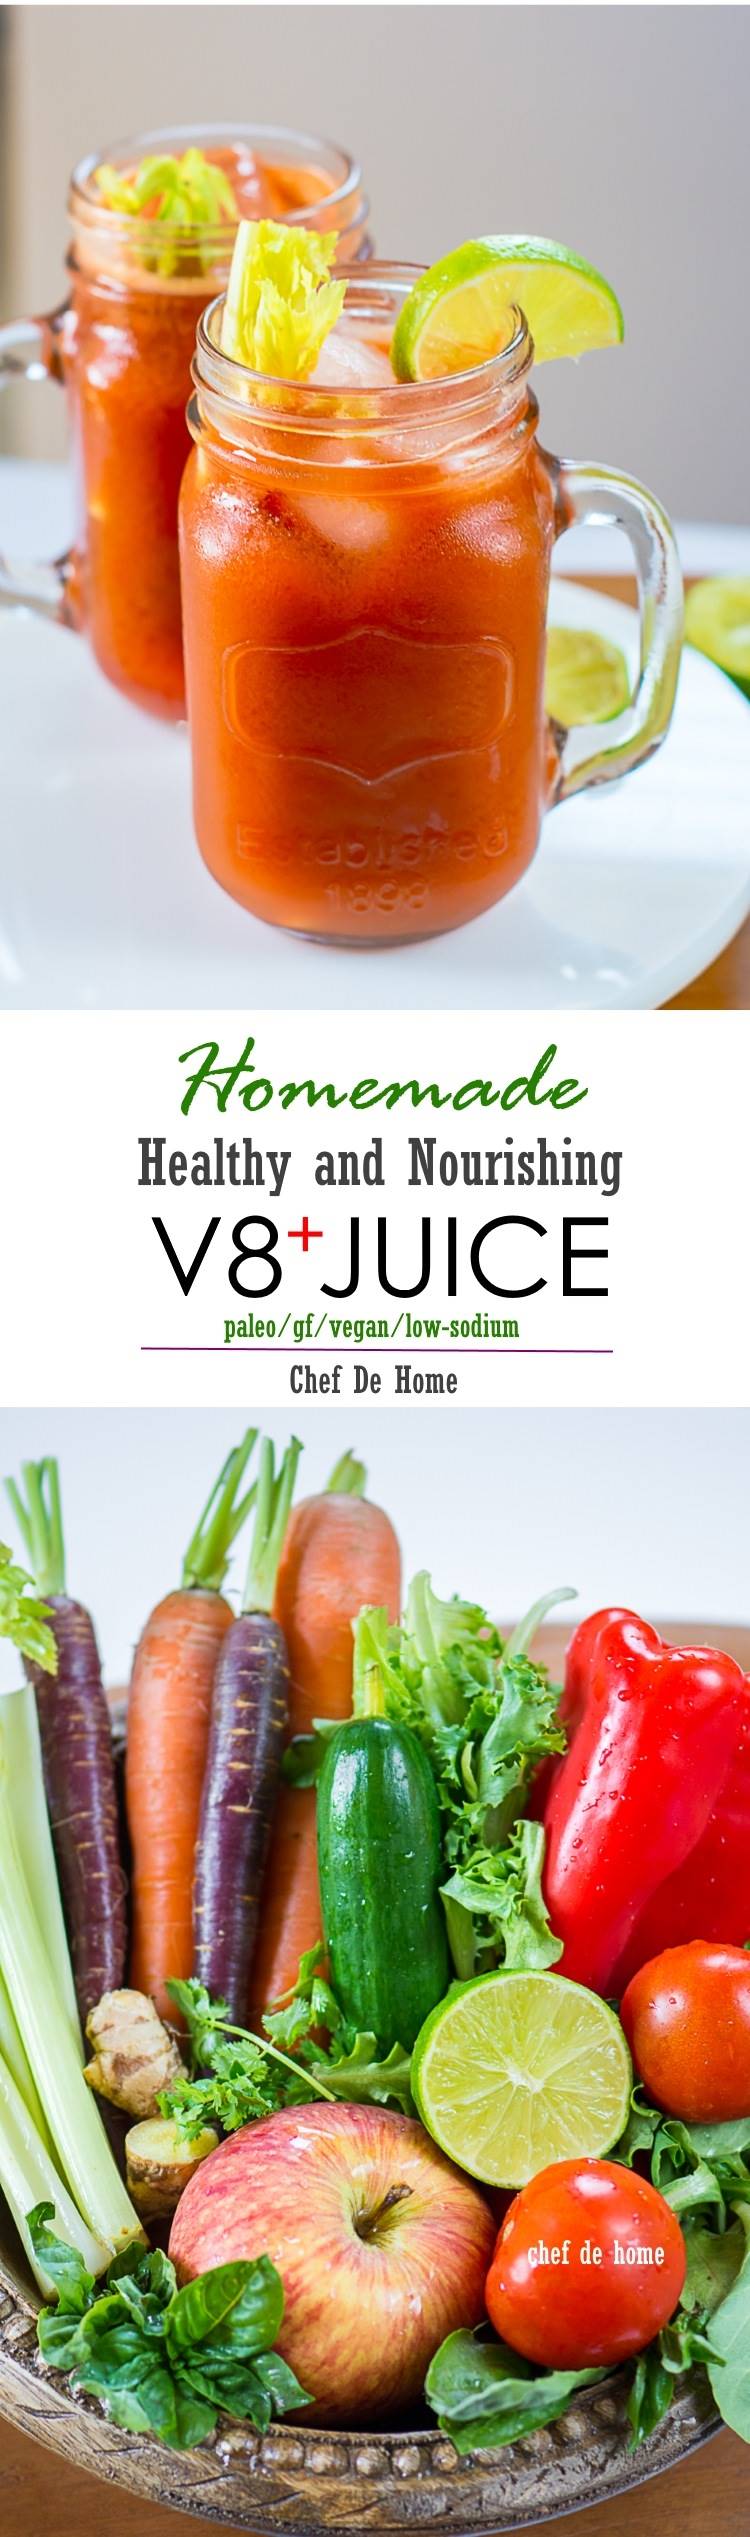 V8 Juice plus is a healthy and homemade vegetable juice for a healthy start of the day | chefdehome.com @chefdehome